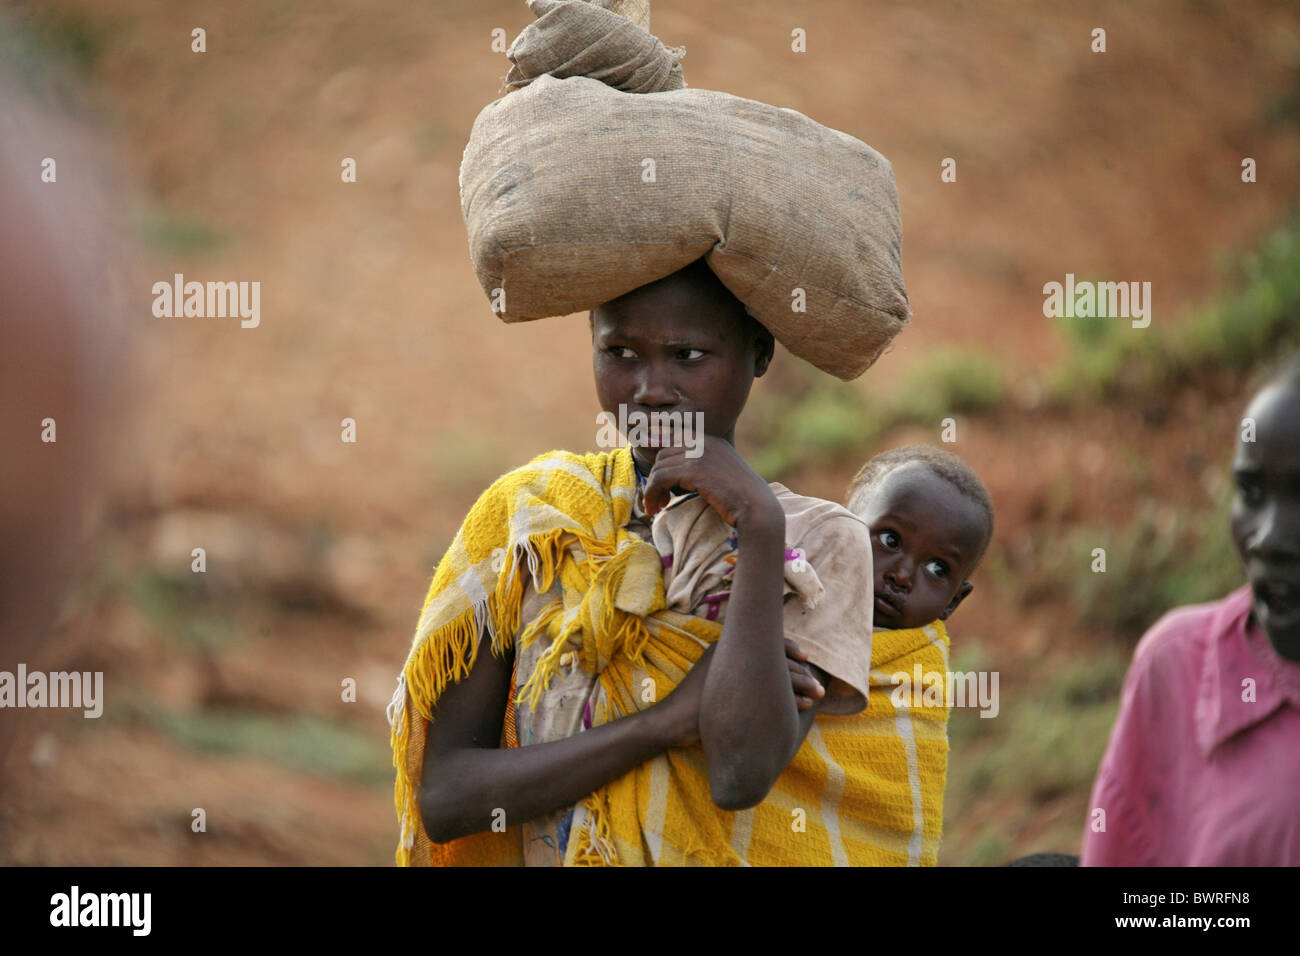 Africa Kenya Child Children Toddler Carry Carrying Cloth Scarf Family Tradition Traditional Africans Afri Stock Photo